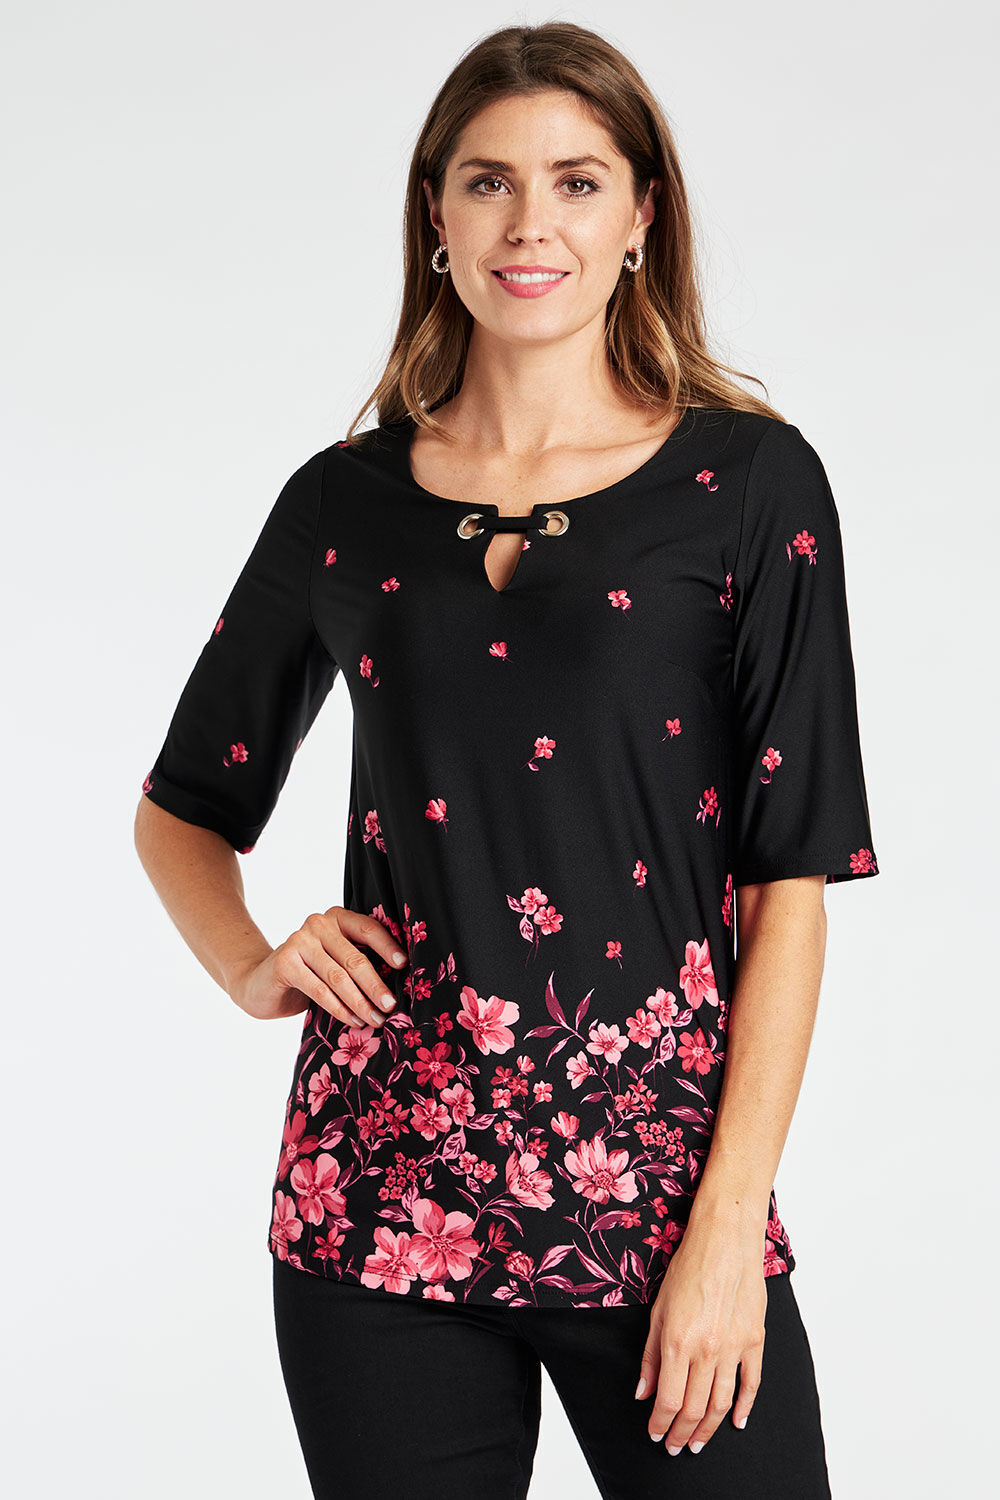 Bonmarche Black Half Sleeve Floral Print Tunic With Eyelet Detail, Size: 14